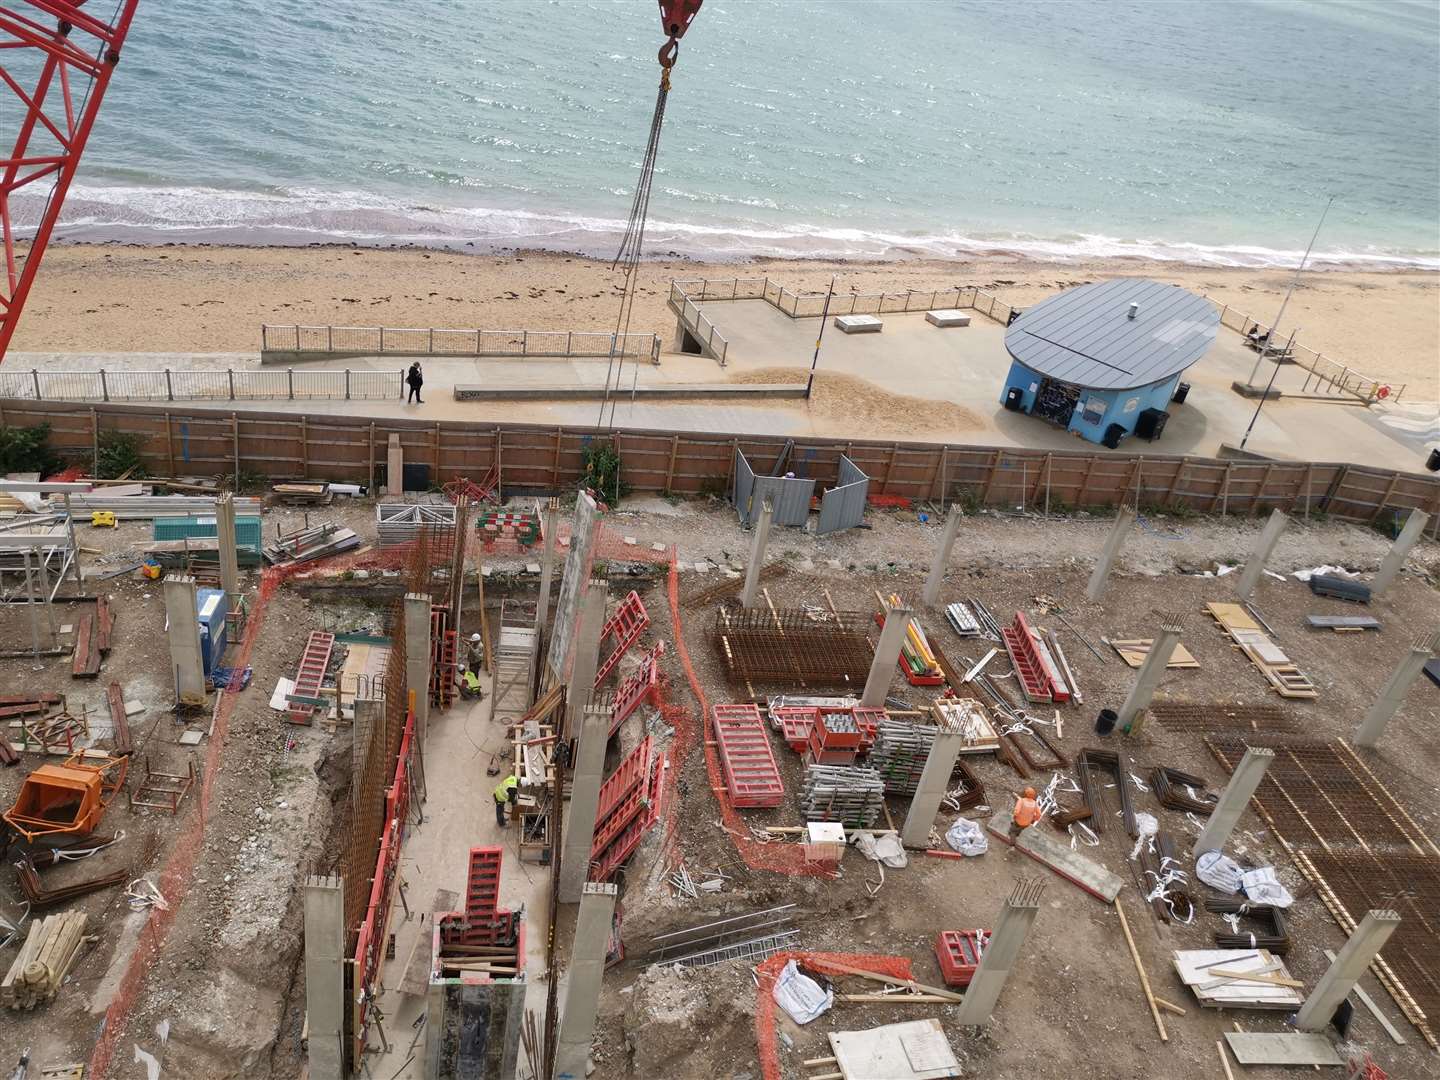 Work has finally restarted at the seafront site